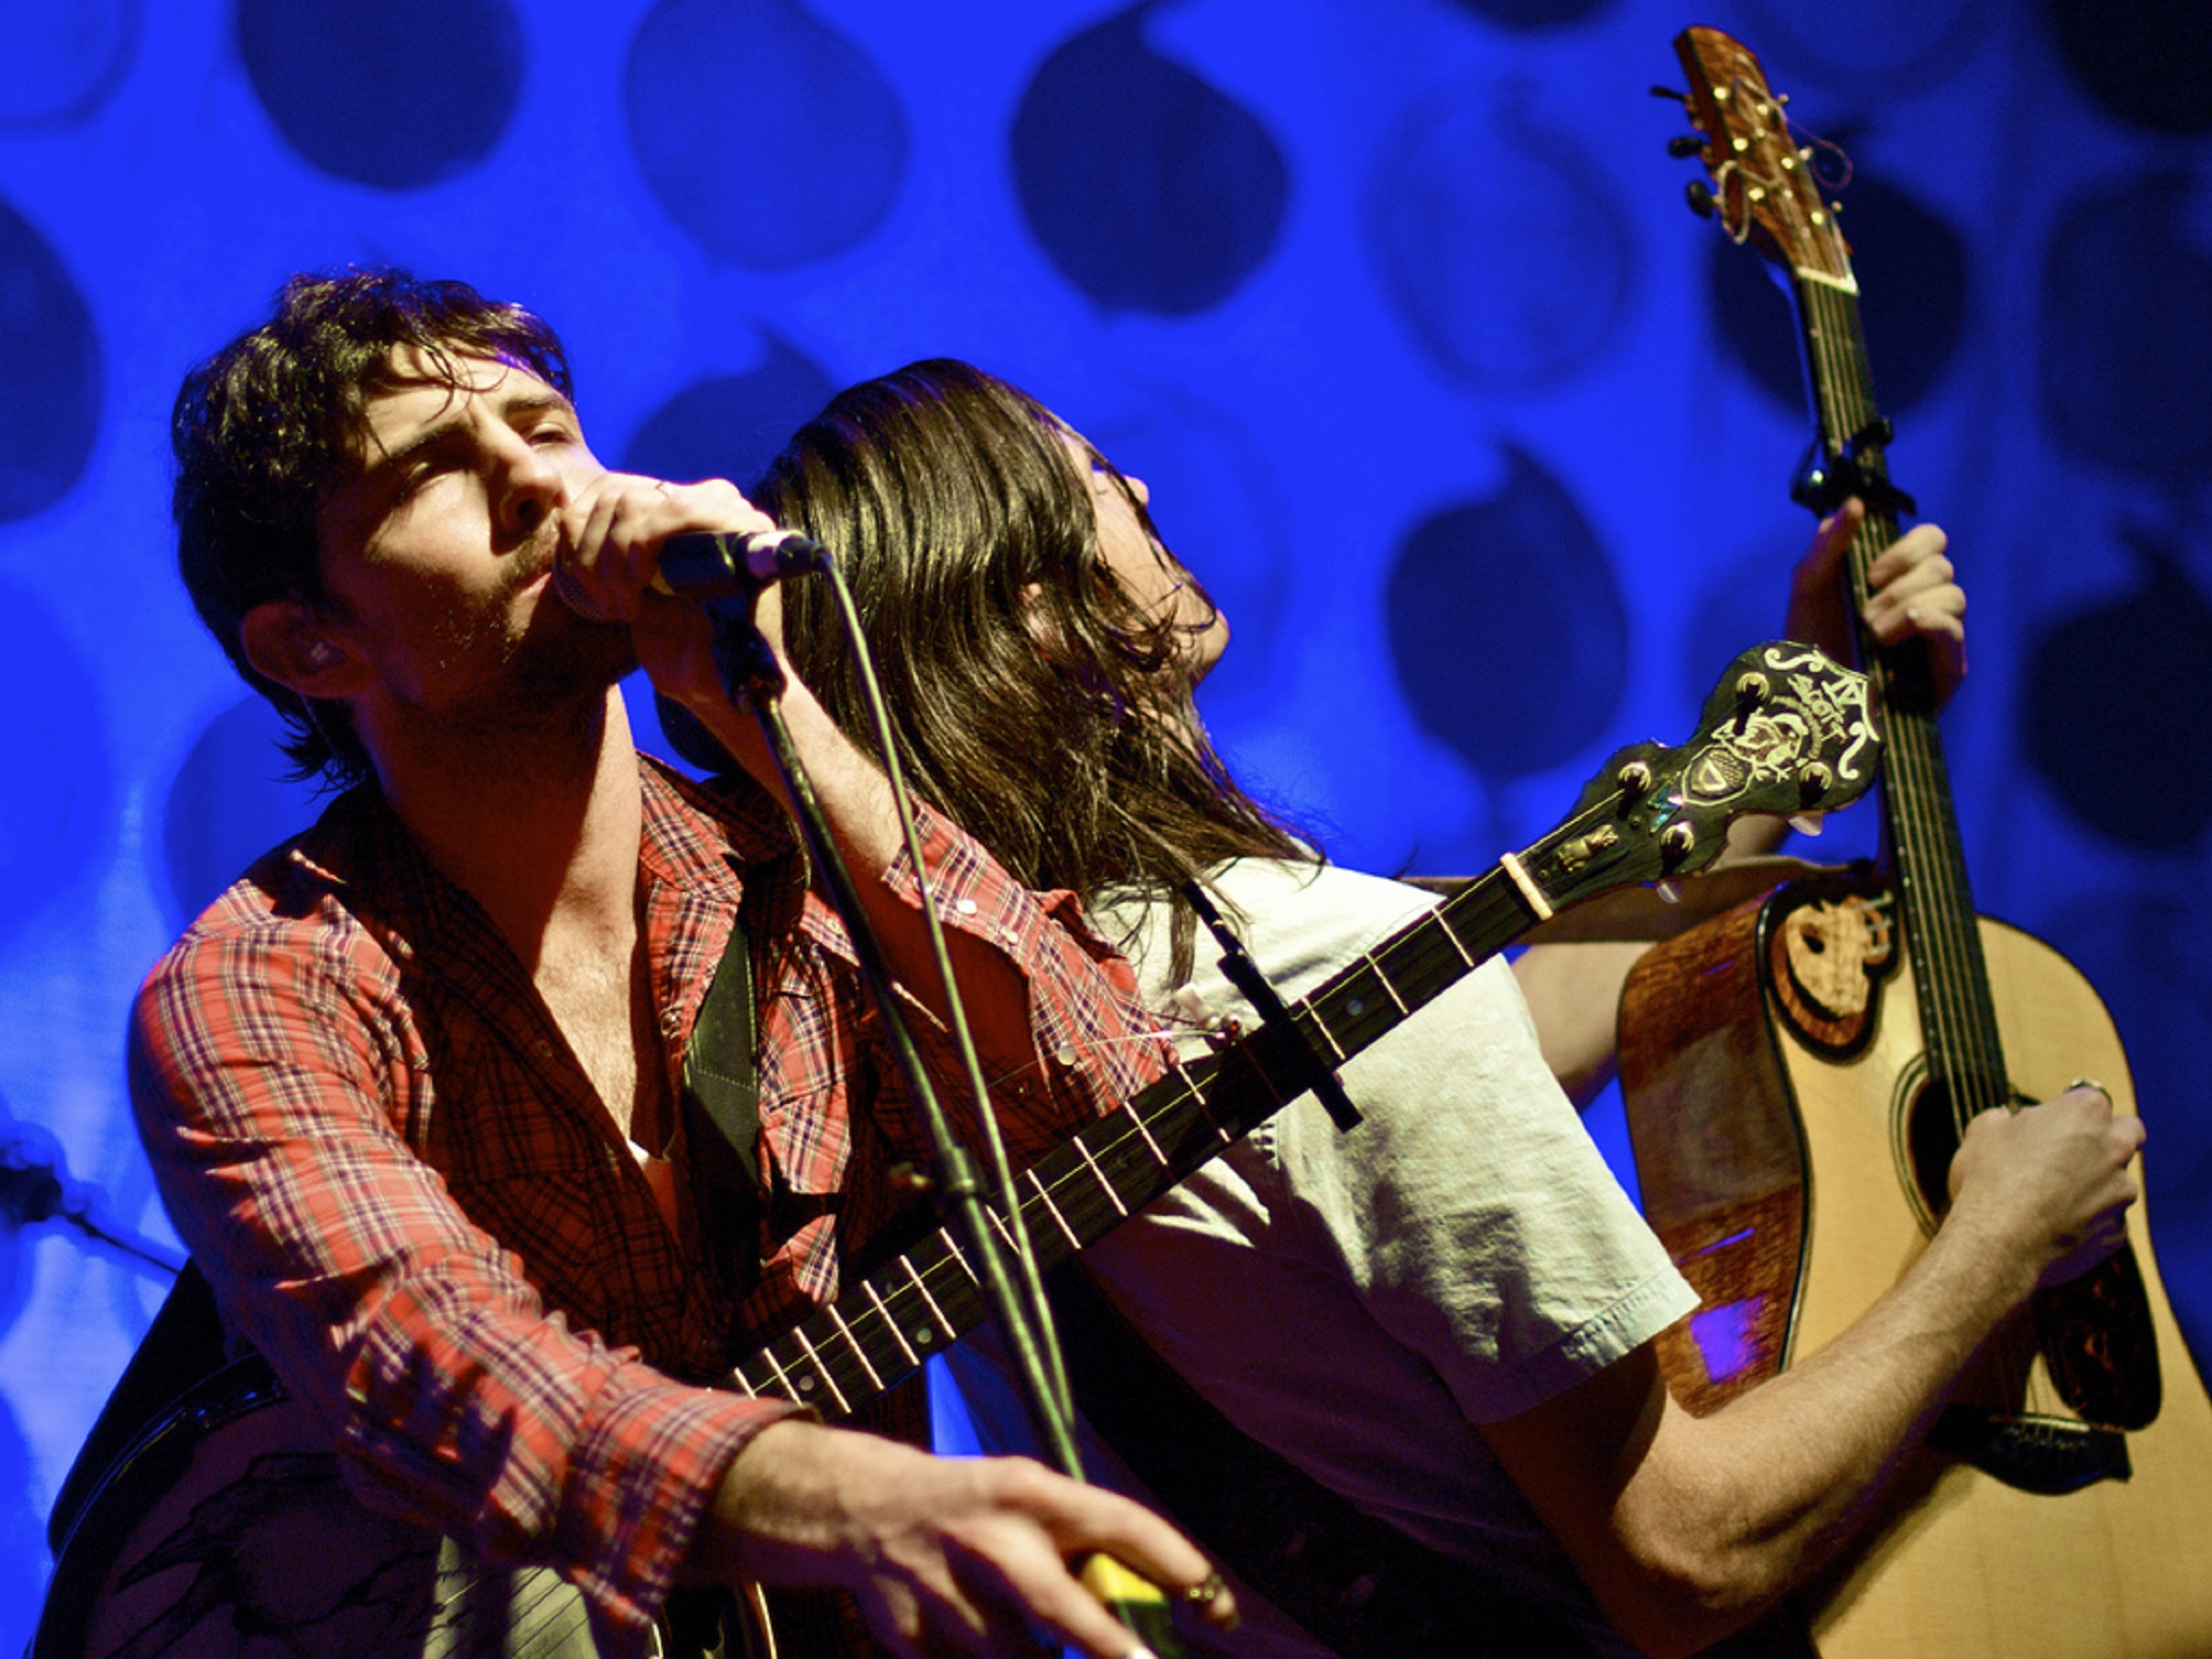 Sell-out crowds for the Avett Bros. at the Boulder Theater